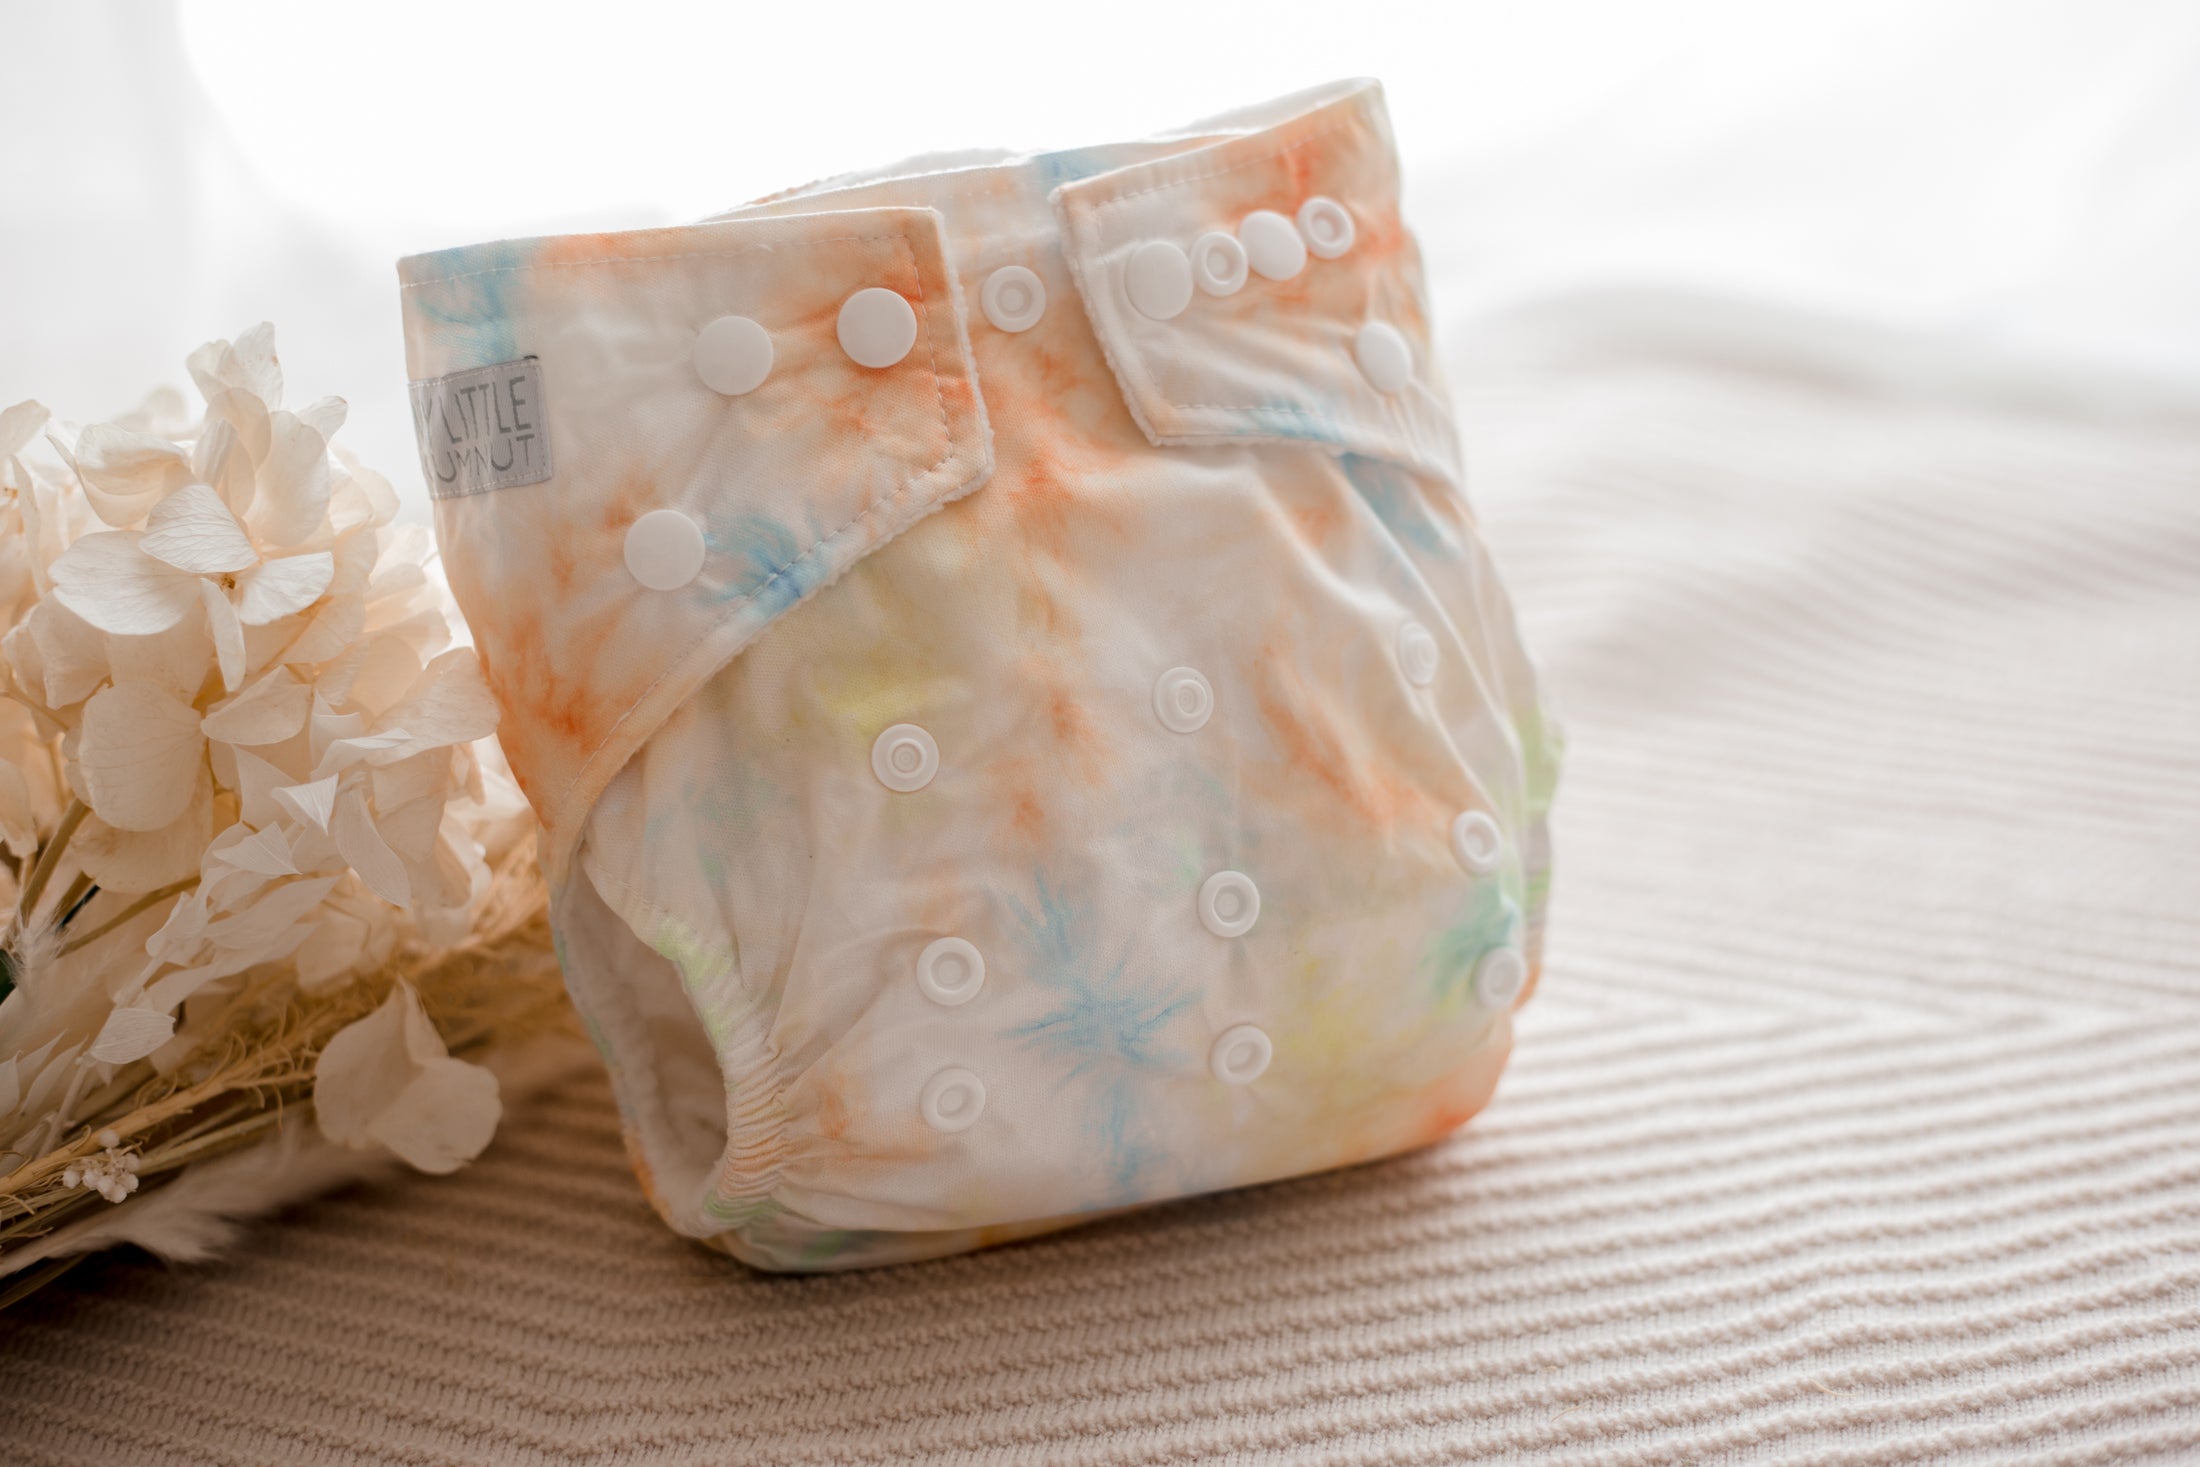 Information on Pocket Nappies South Africa